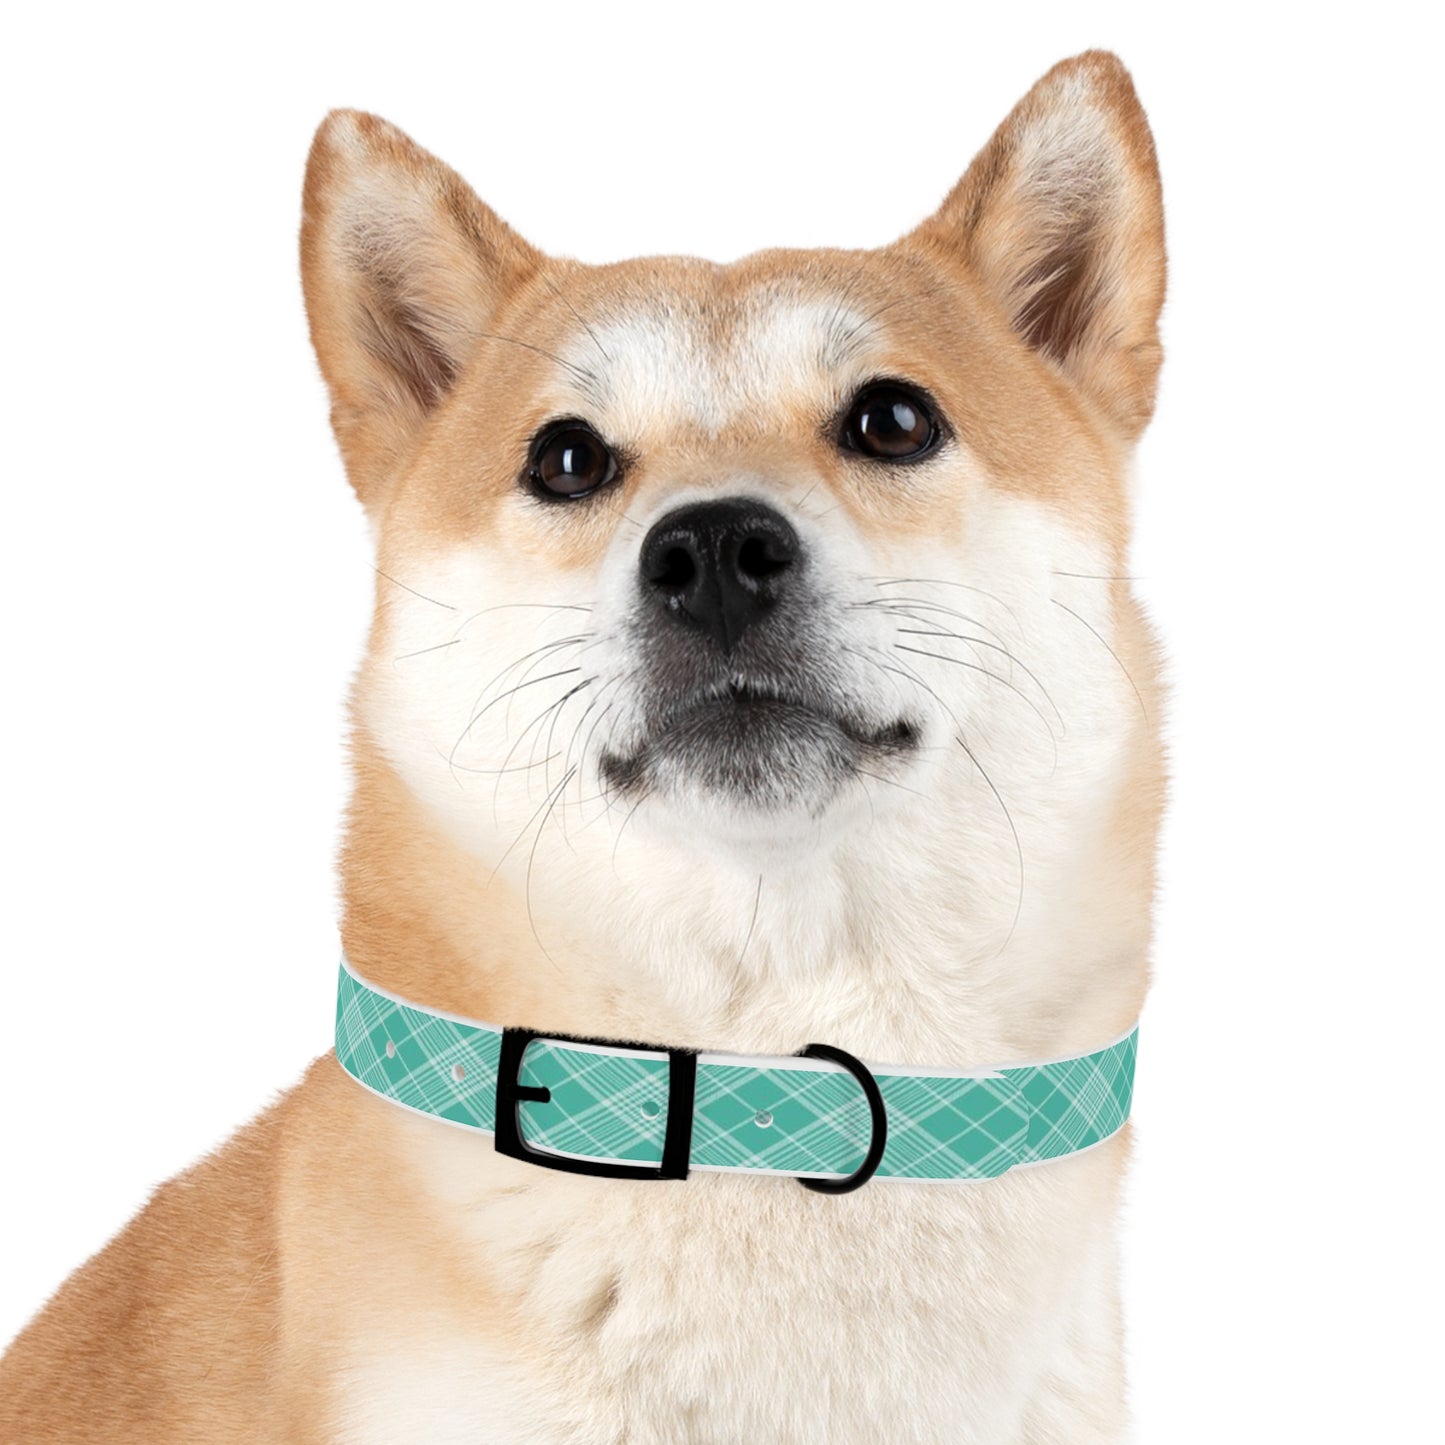 Turquoise and White Plaid Dog Collar